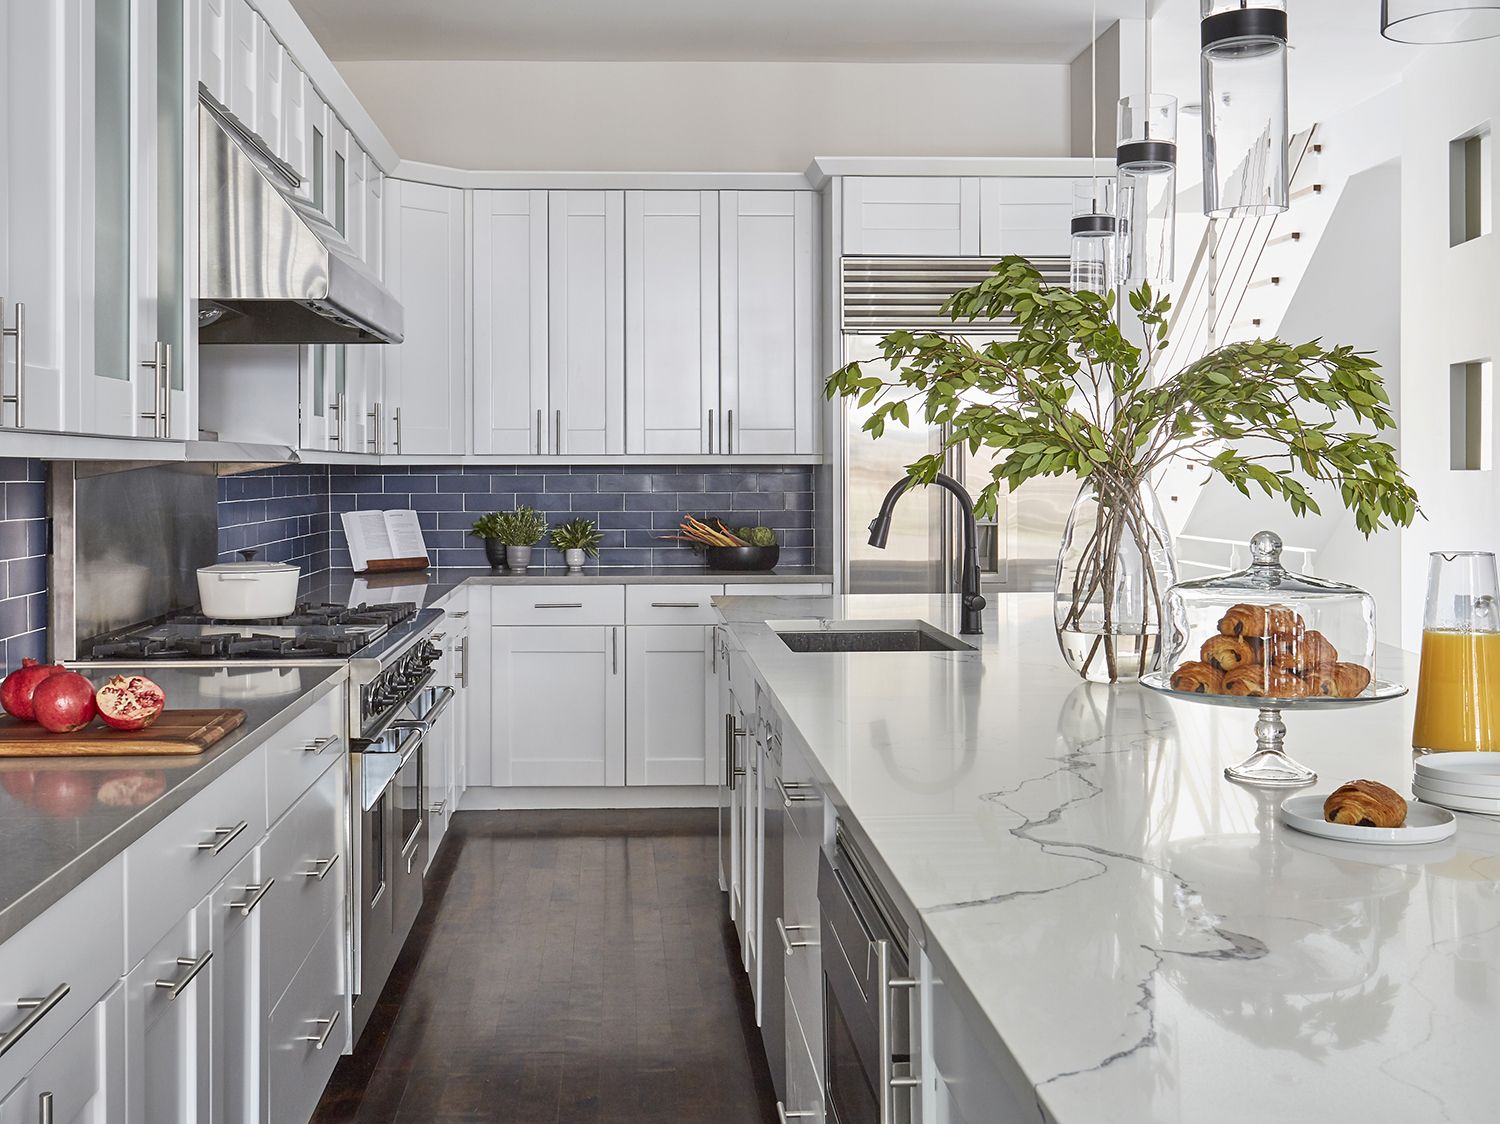 32 Stylish Ways To Work With Gray Kitchen Cabinets